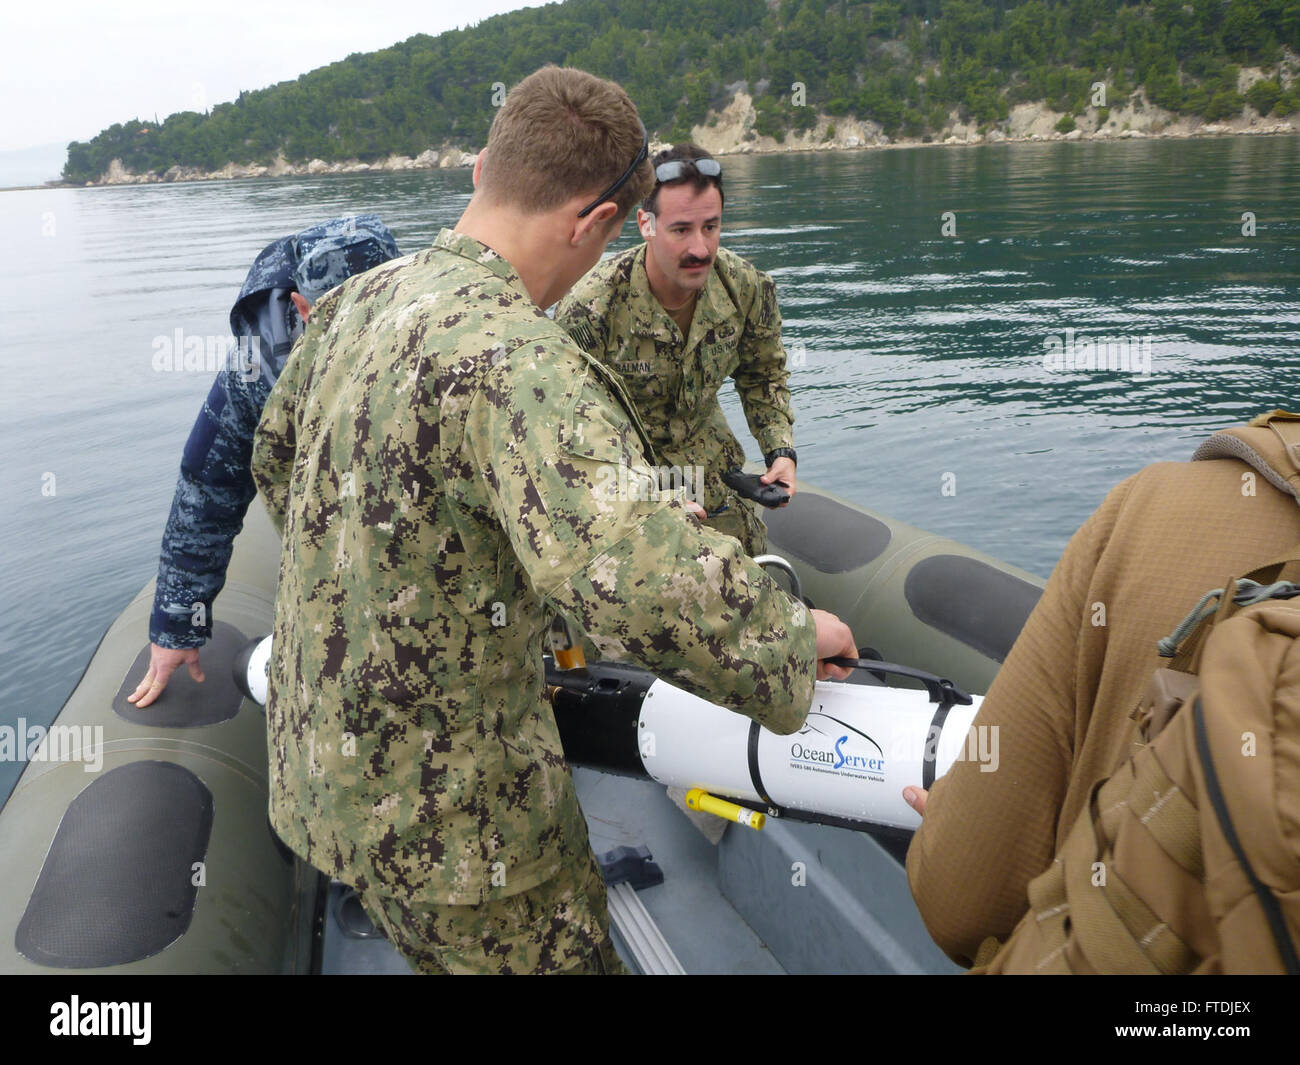 151205-N-XX888-003 SPLIT, Croatia (Dec. 5, 2015) Explosive Ordnance Disposal Technician 2nd Class Matt Volar, left, and Explosive Ordnance Disposal Technician 2nd Class Dan Salman, assigned to Explosive Ordnance Disposal Mobile Unit 8, and Croatian divers recover the IVER-3 UUV Dec. 5, 2015. U.S. 6th Fleet, headquartered in Naples, Italy, conducts the full spectrum of joint and naval operations, often in concert with allied, joint, and interagency partners, in order to advance U.S. national interests and security and stability in Europe and Africa. (U.S. Navy photo by Lt. Jonathan Dobbins/ Rel Stock Photo